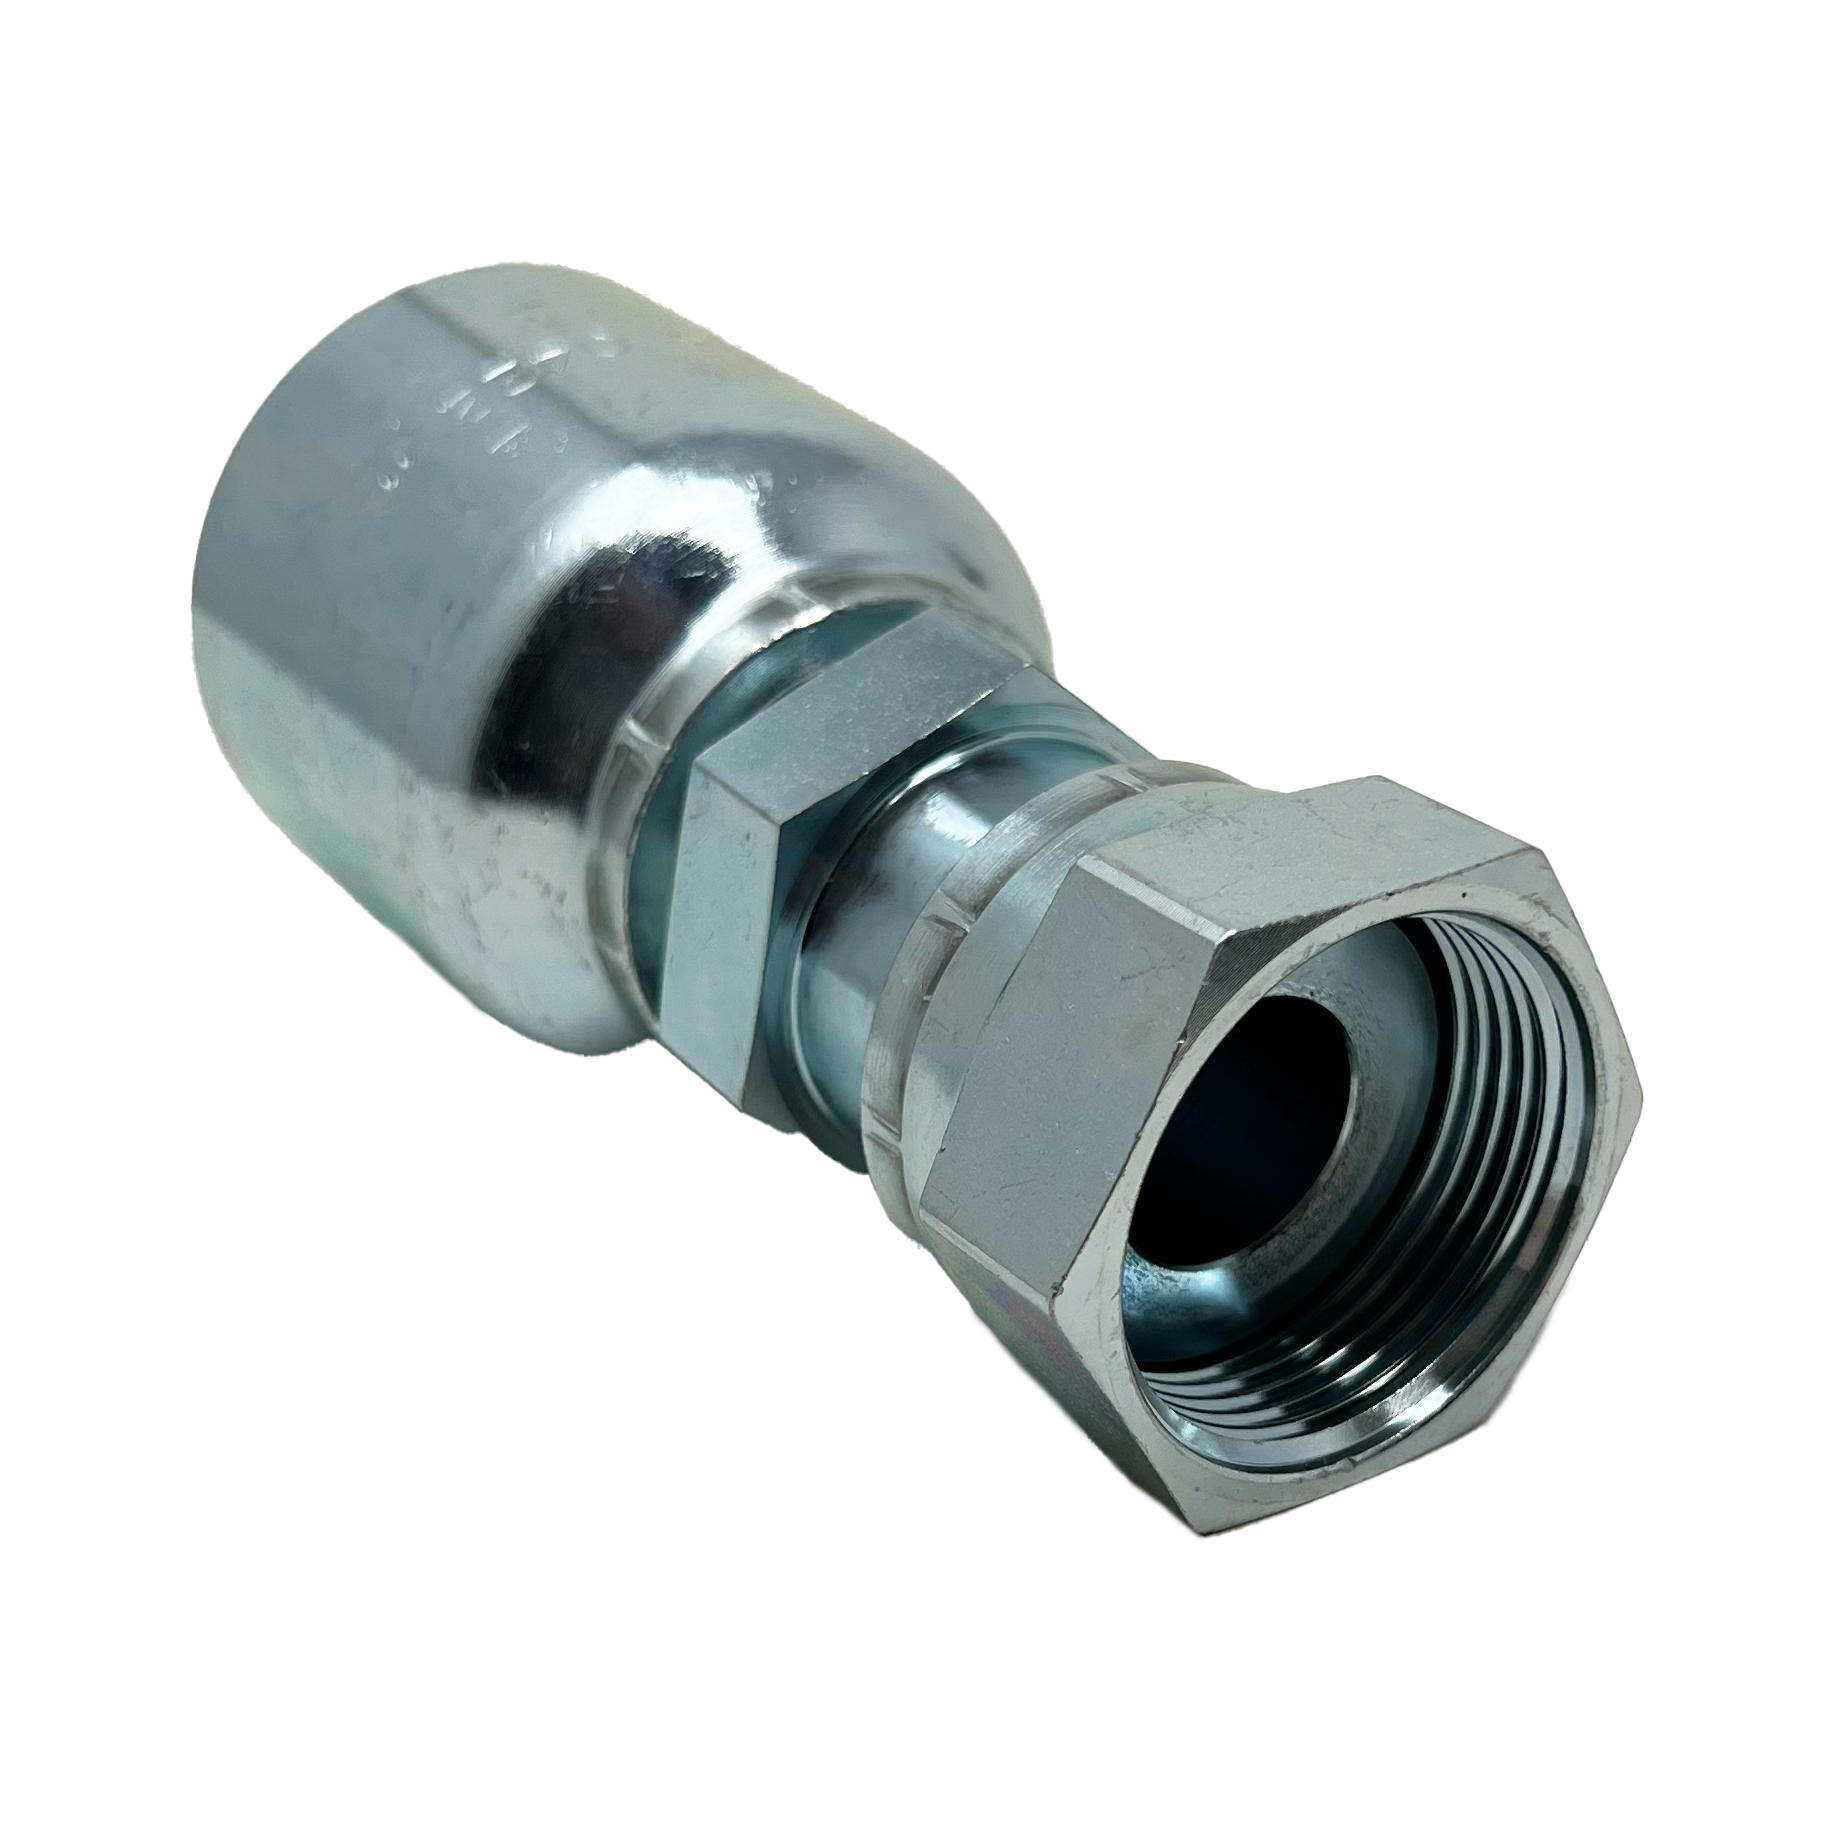 B2-OFFX-1620: Continental Hose Fitting, 1" Hose ID x 1-11/16-12 Female ORFS, Straight Swivel Connection